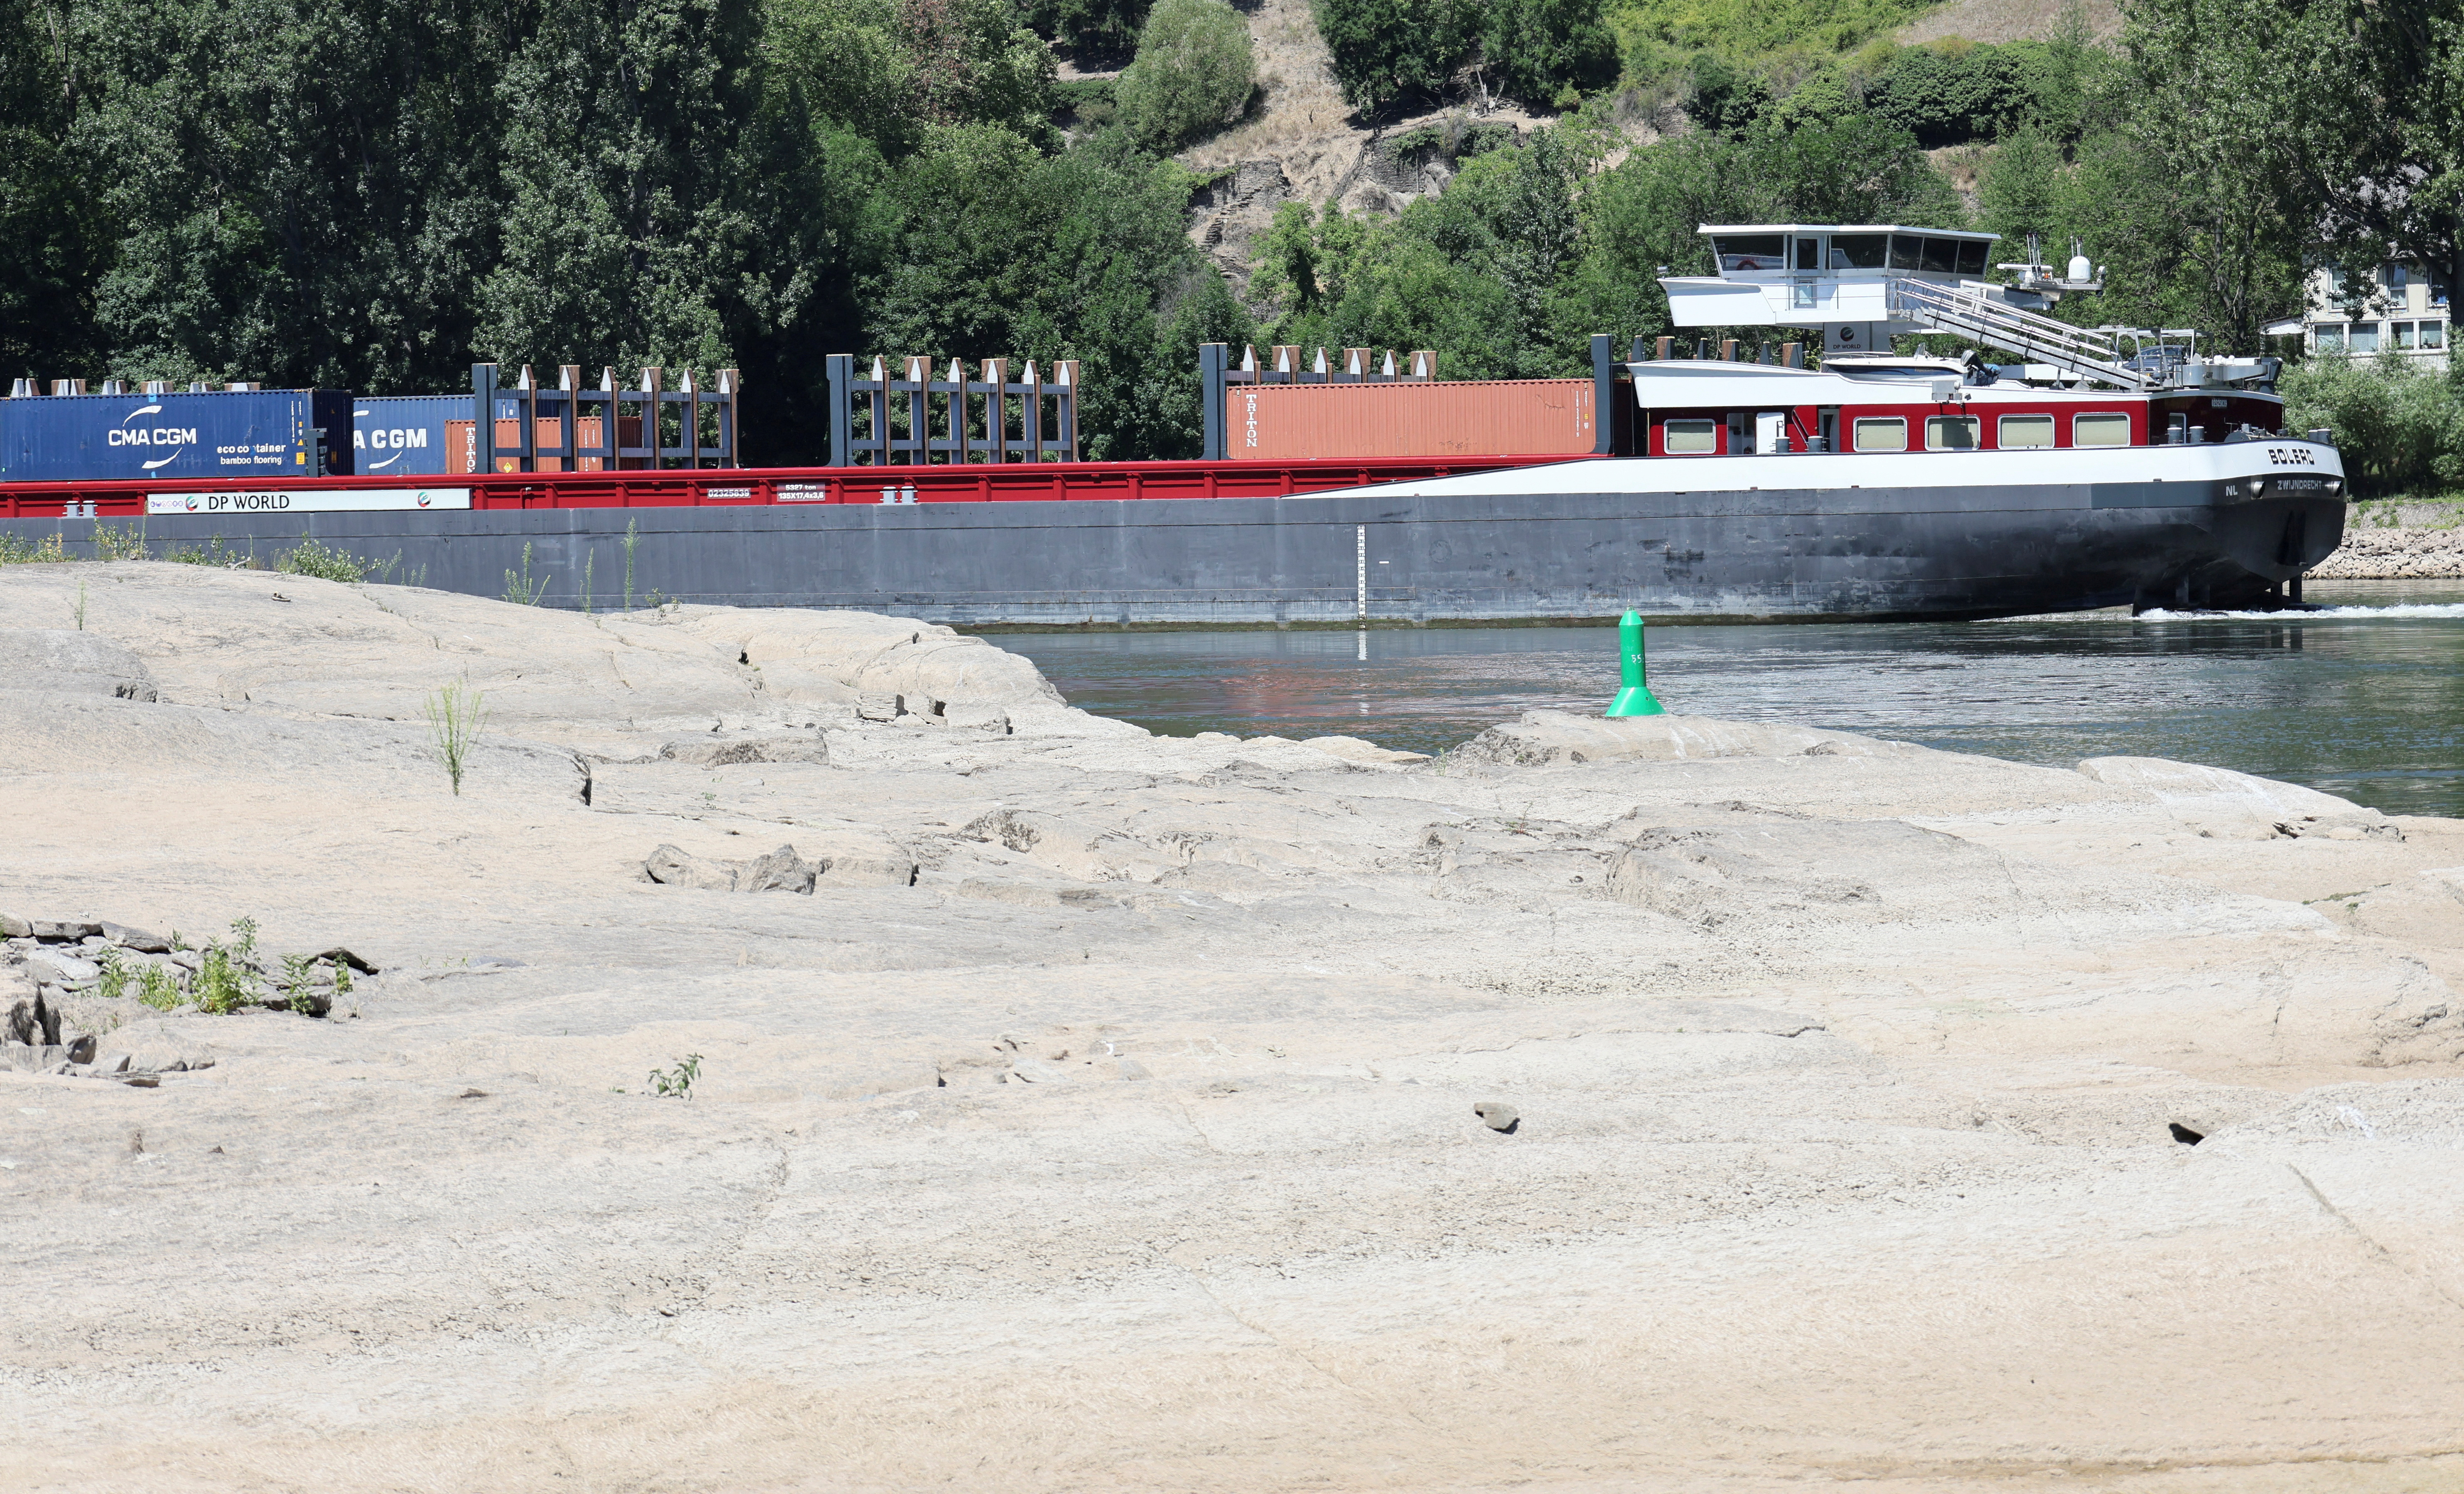 Low water levels after recent dry weather continue to prevent cargo vessels from sailing fully loaded on the river Rhine in Germany